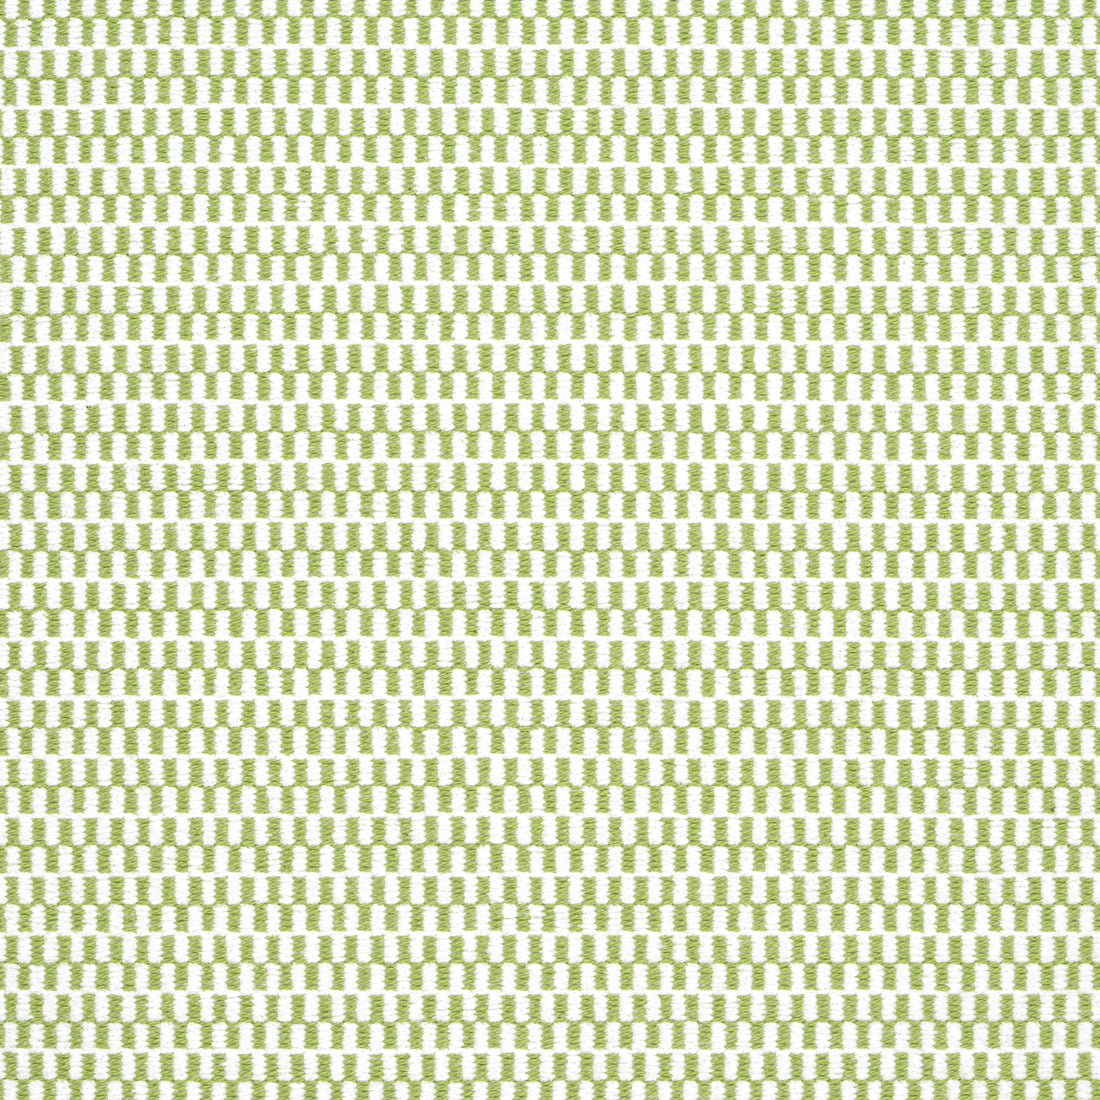 Block Texture fabric in apple color - pattern number W74240 - by Thibaut in the Passage collection